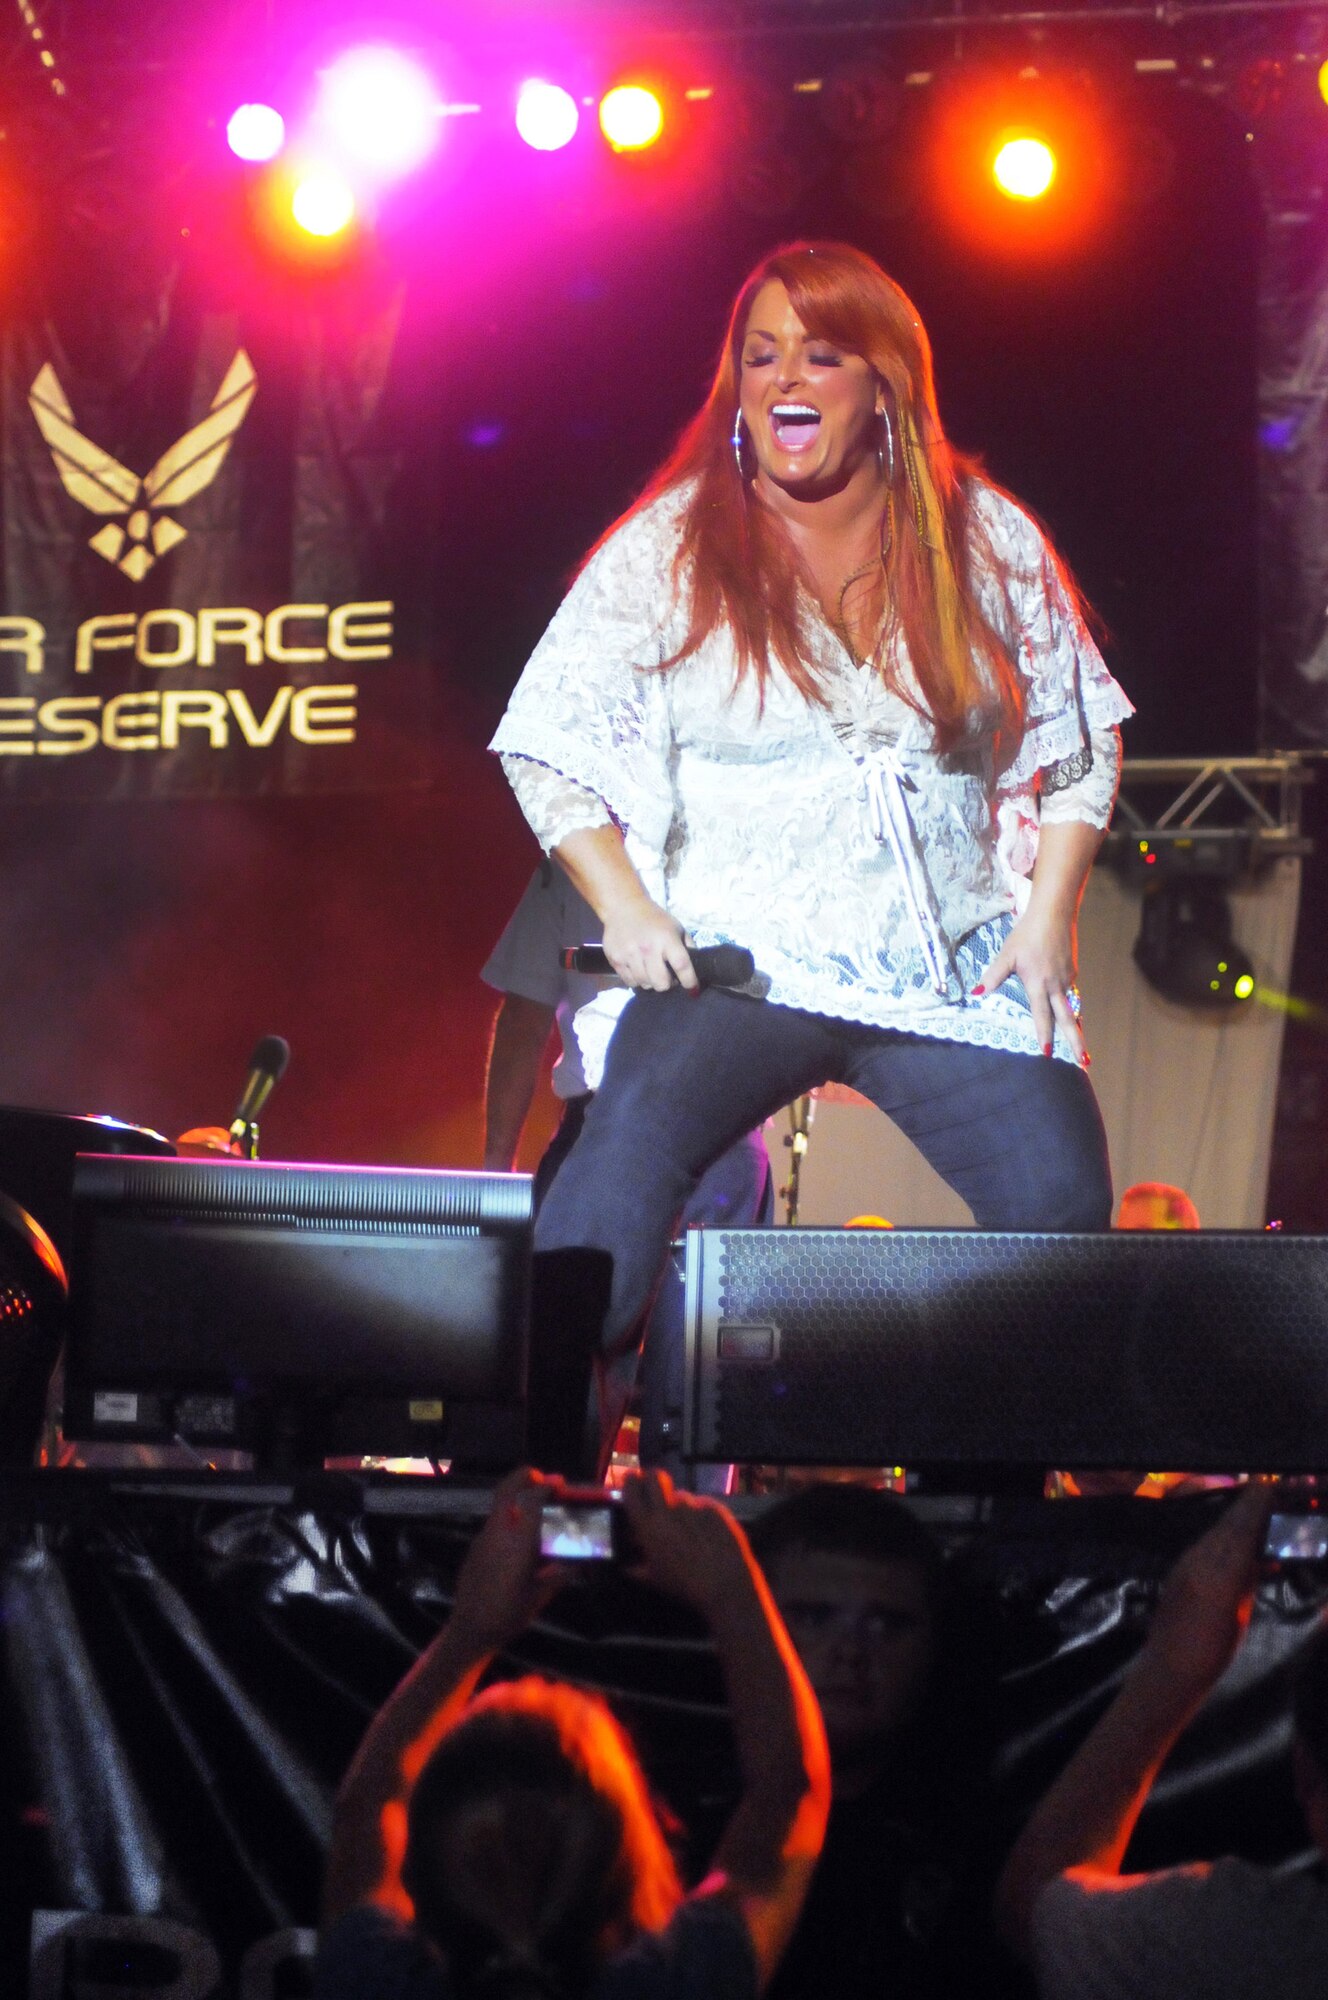 Wynonna Judd pauses during her performance to allow a youth to take a close up photo. U. S. Air Force photo by Sue Sapp